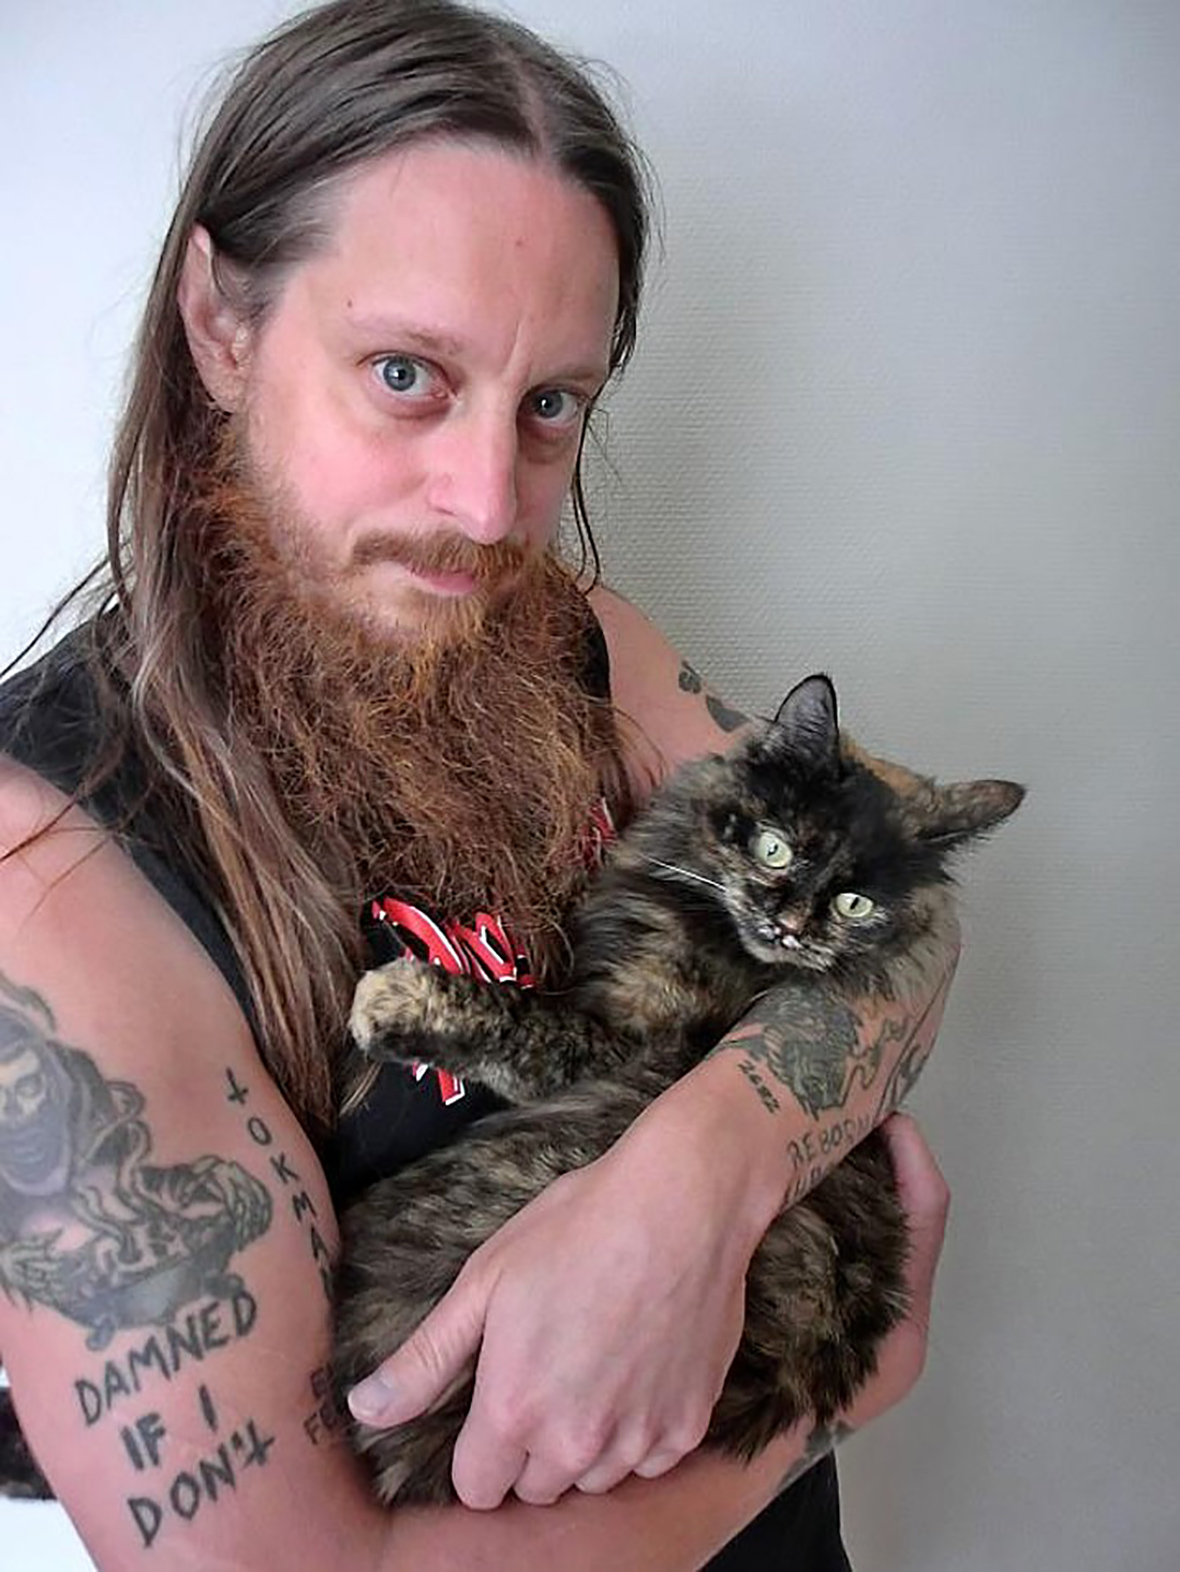 Black metal musician Fenriz elected to Norwegian town council against his will